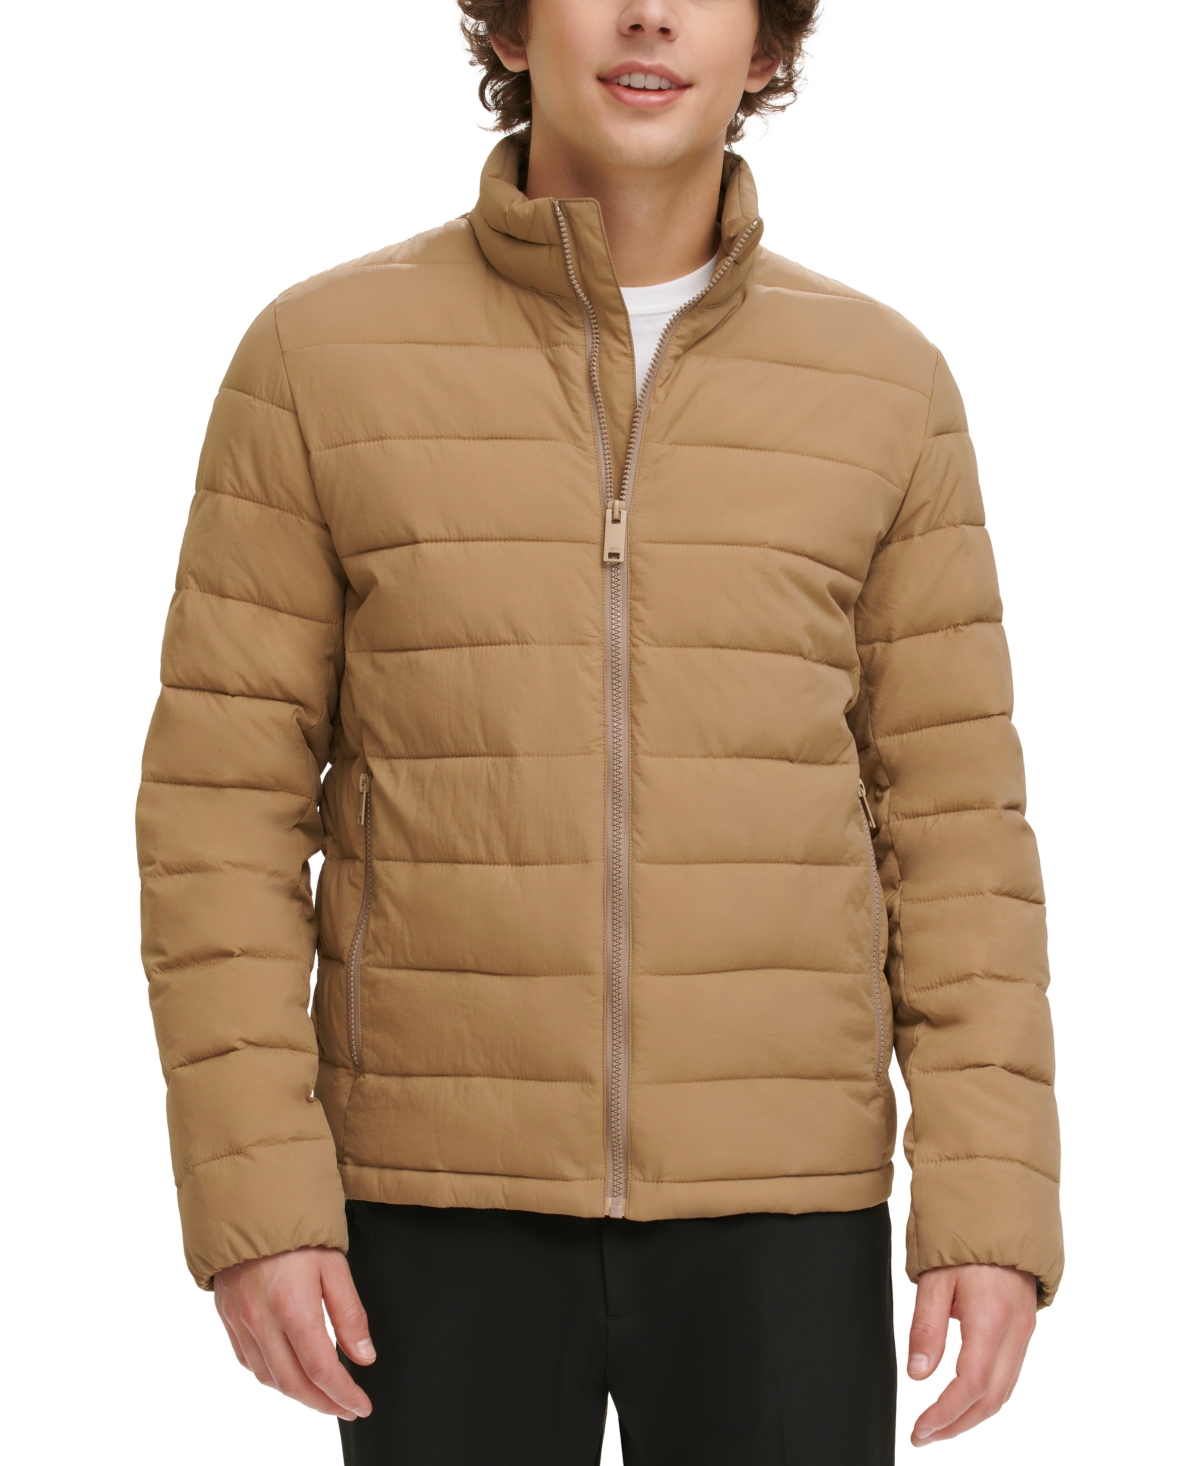 Dkny Men's Quilted Full-zip Stand Collar Puffer Jacket In Khaki